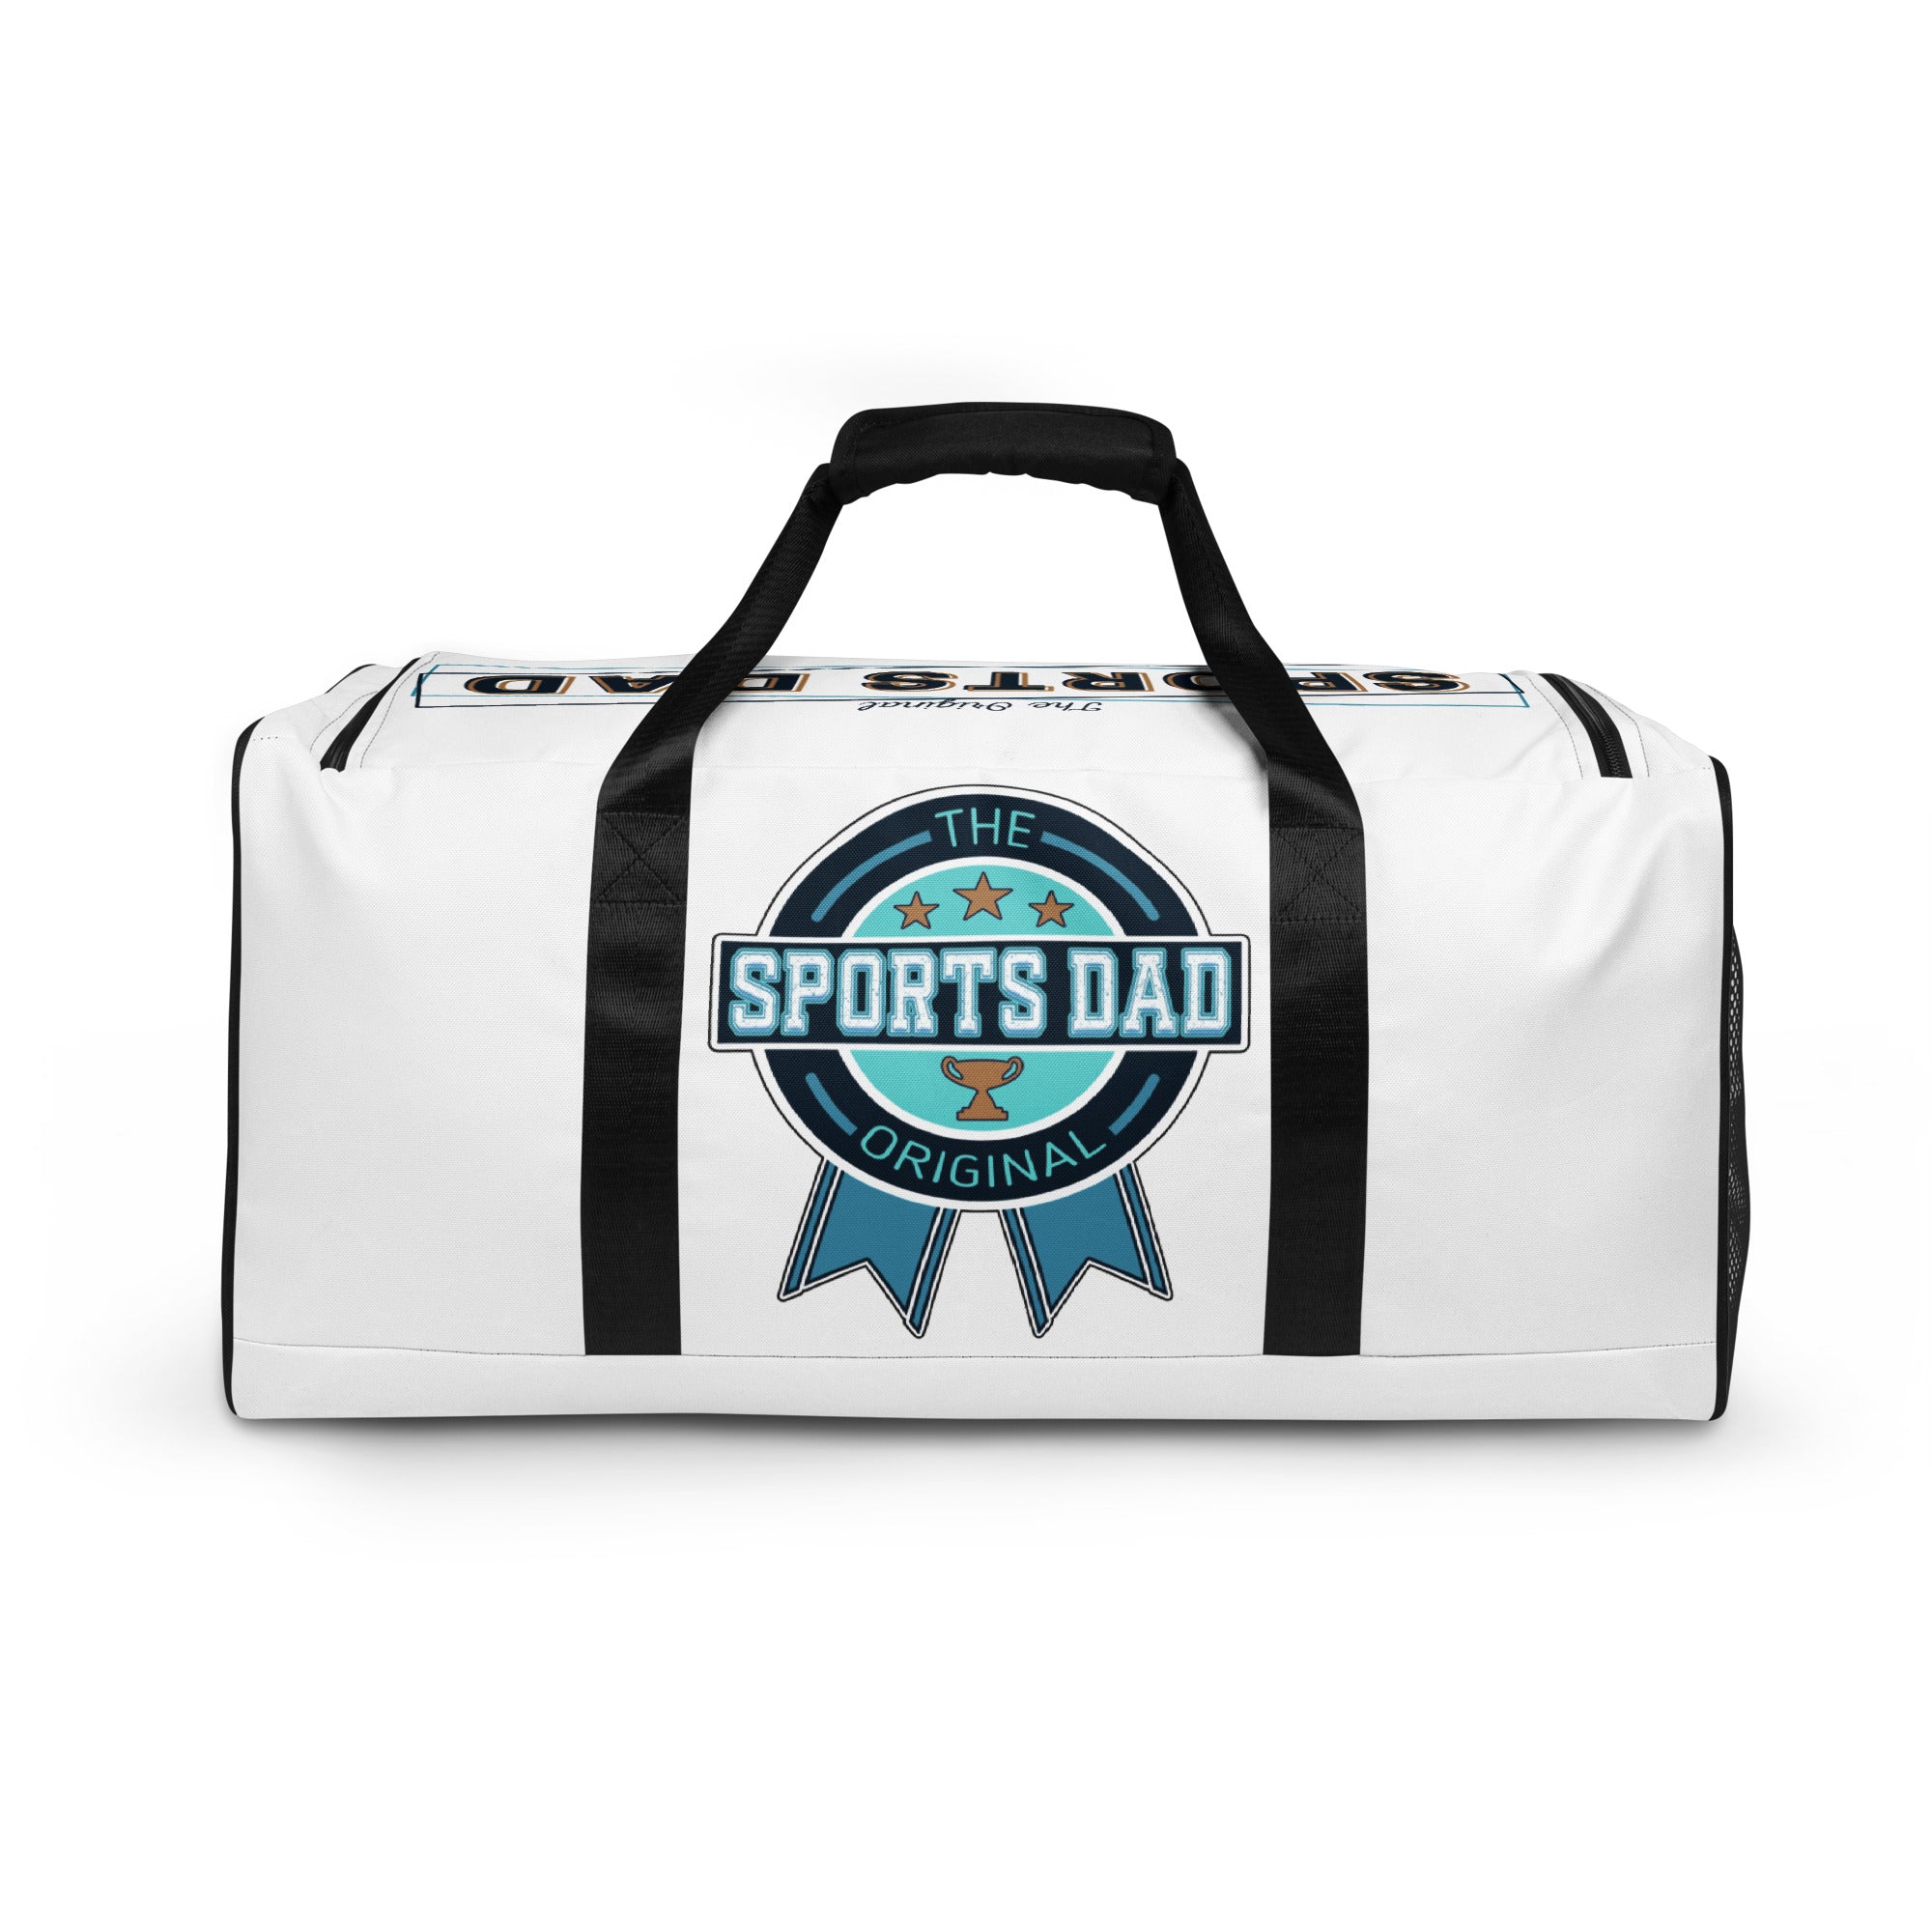 Sports Dad Ultimate Duffle Bag - White